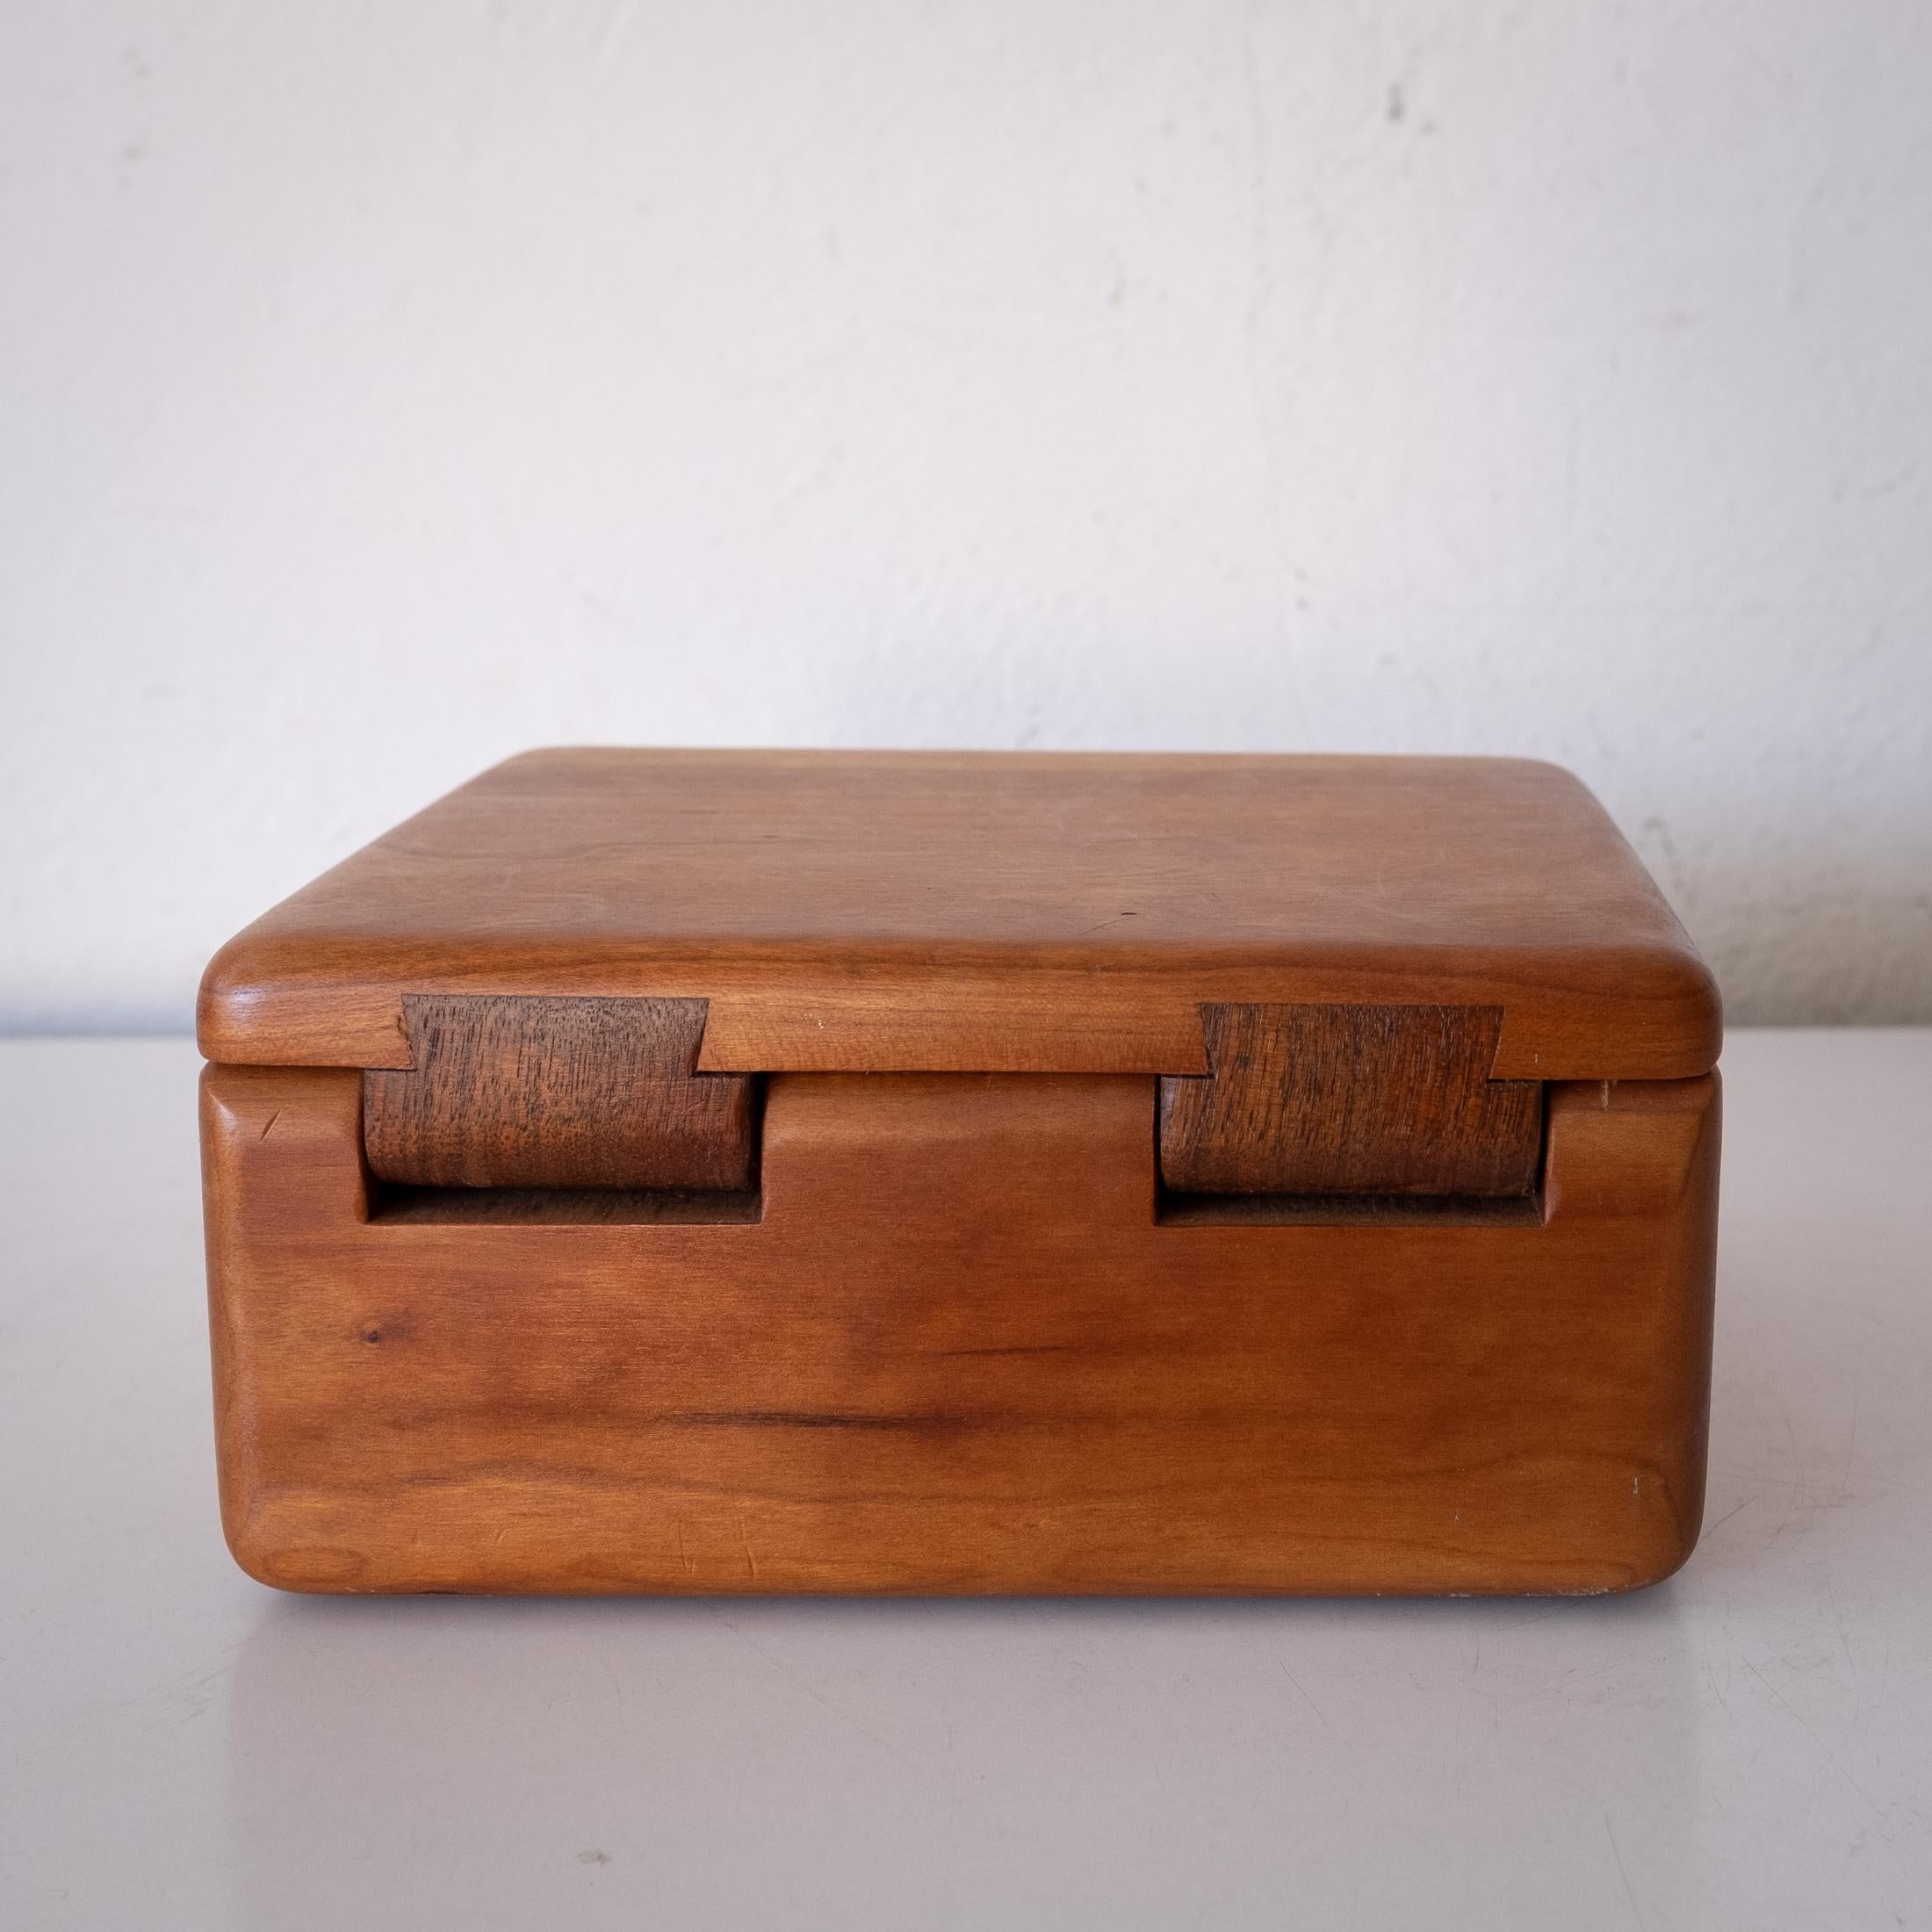 Studio Handcrafted Wood Jewelry Box 1970s For Sale 3